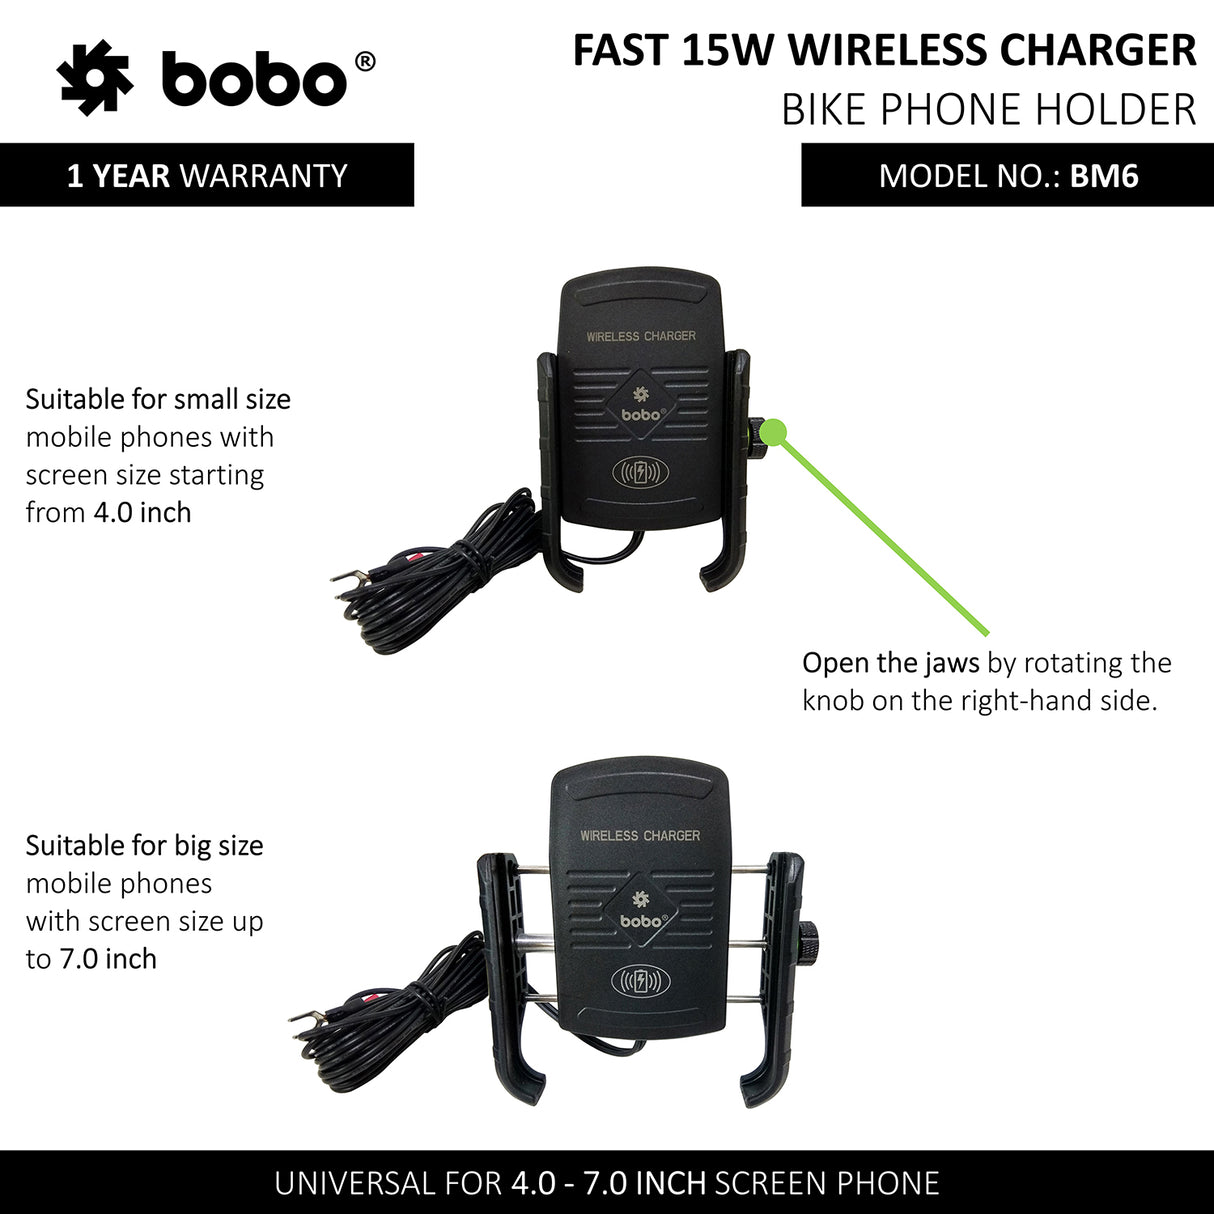 BM6 - Fast 15W Wireless Charger